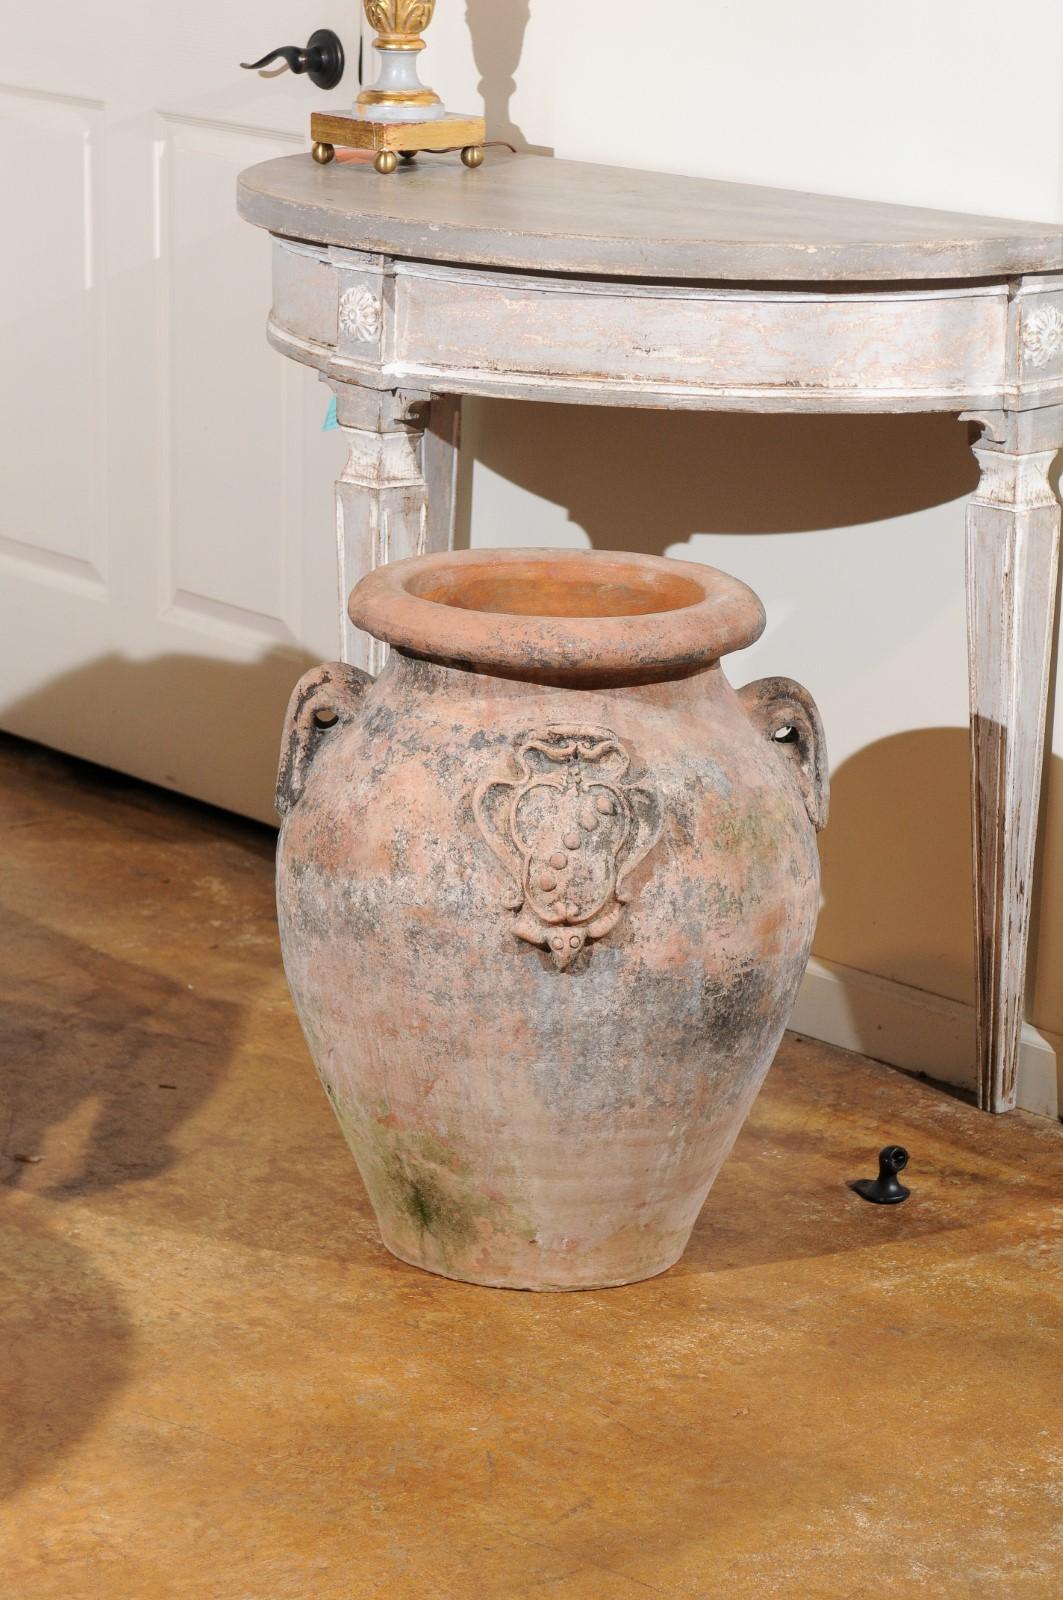 A large Italian terracotta jardinière from the 20th century with double handles and family heraldic crest. Born in Italy during the 20th century, this Italian olive jar jardinière features a large lip leading our eye to the rounded belly of the